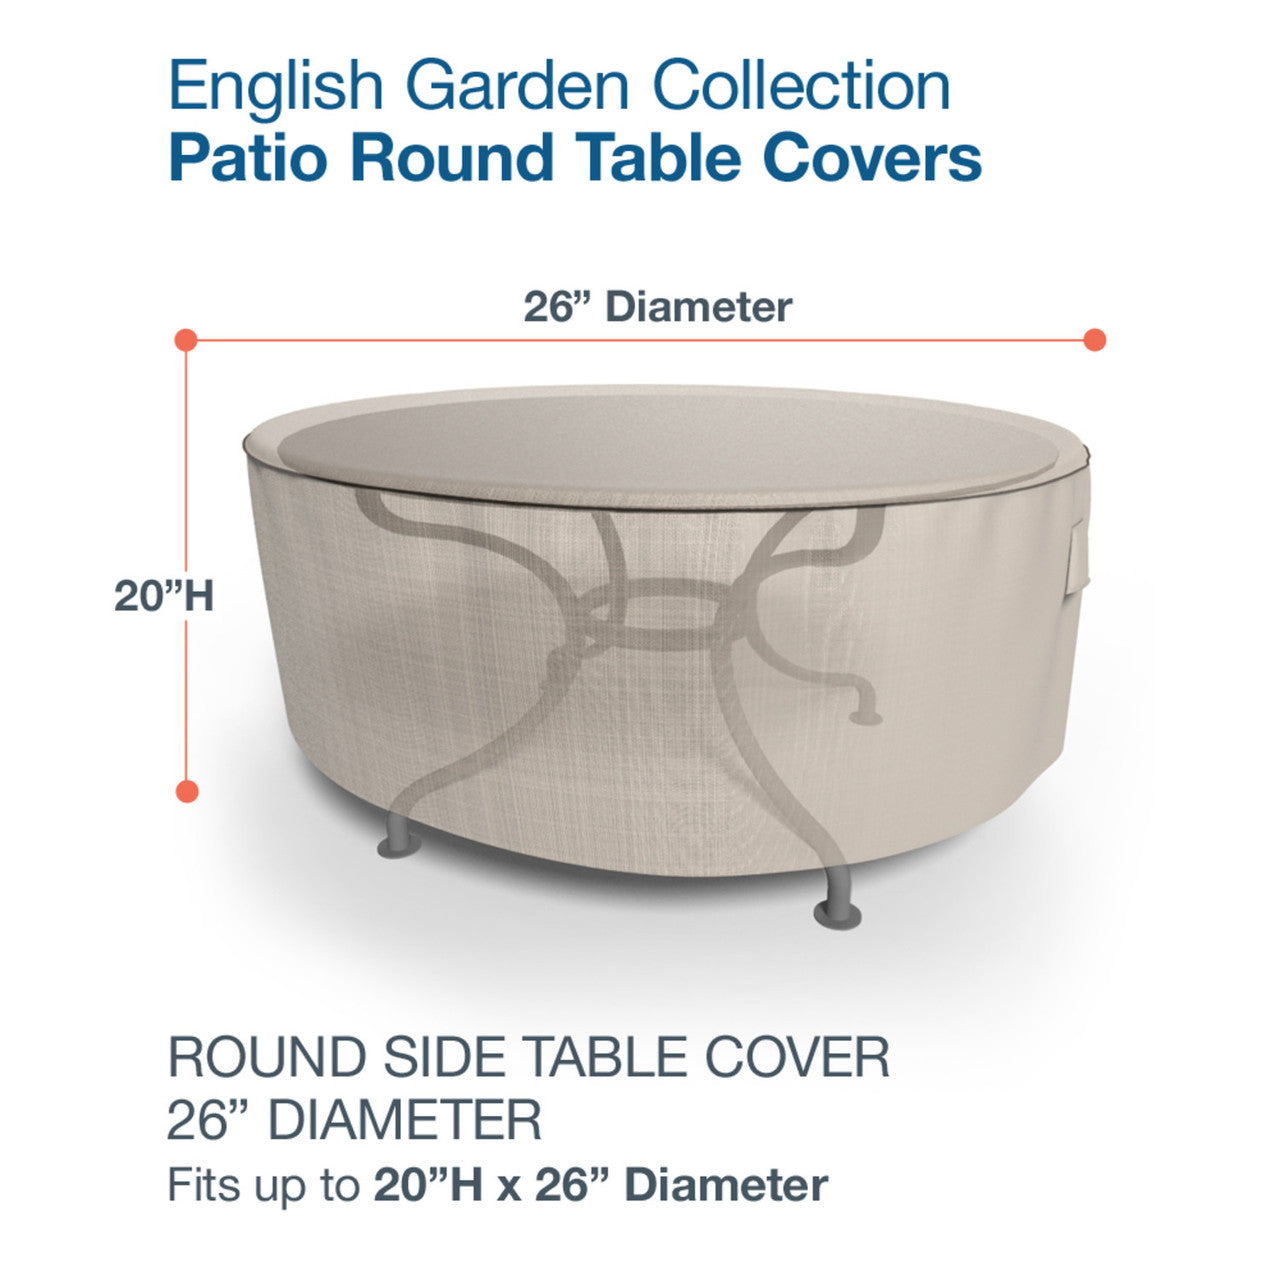 Budge Industries English Garden Round Patio Table Cover